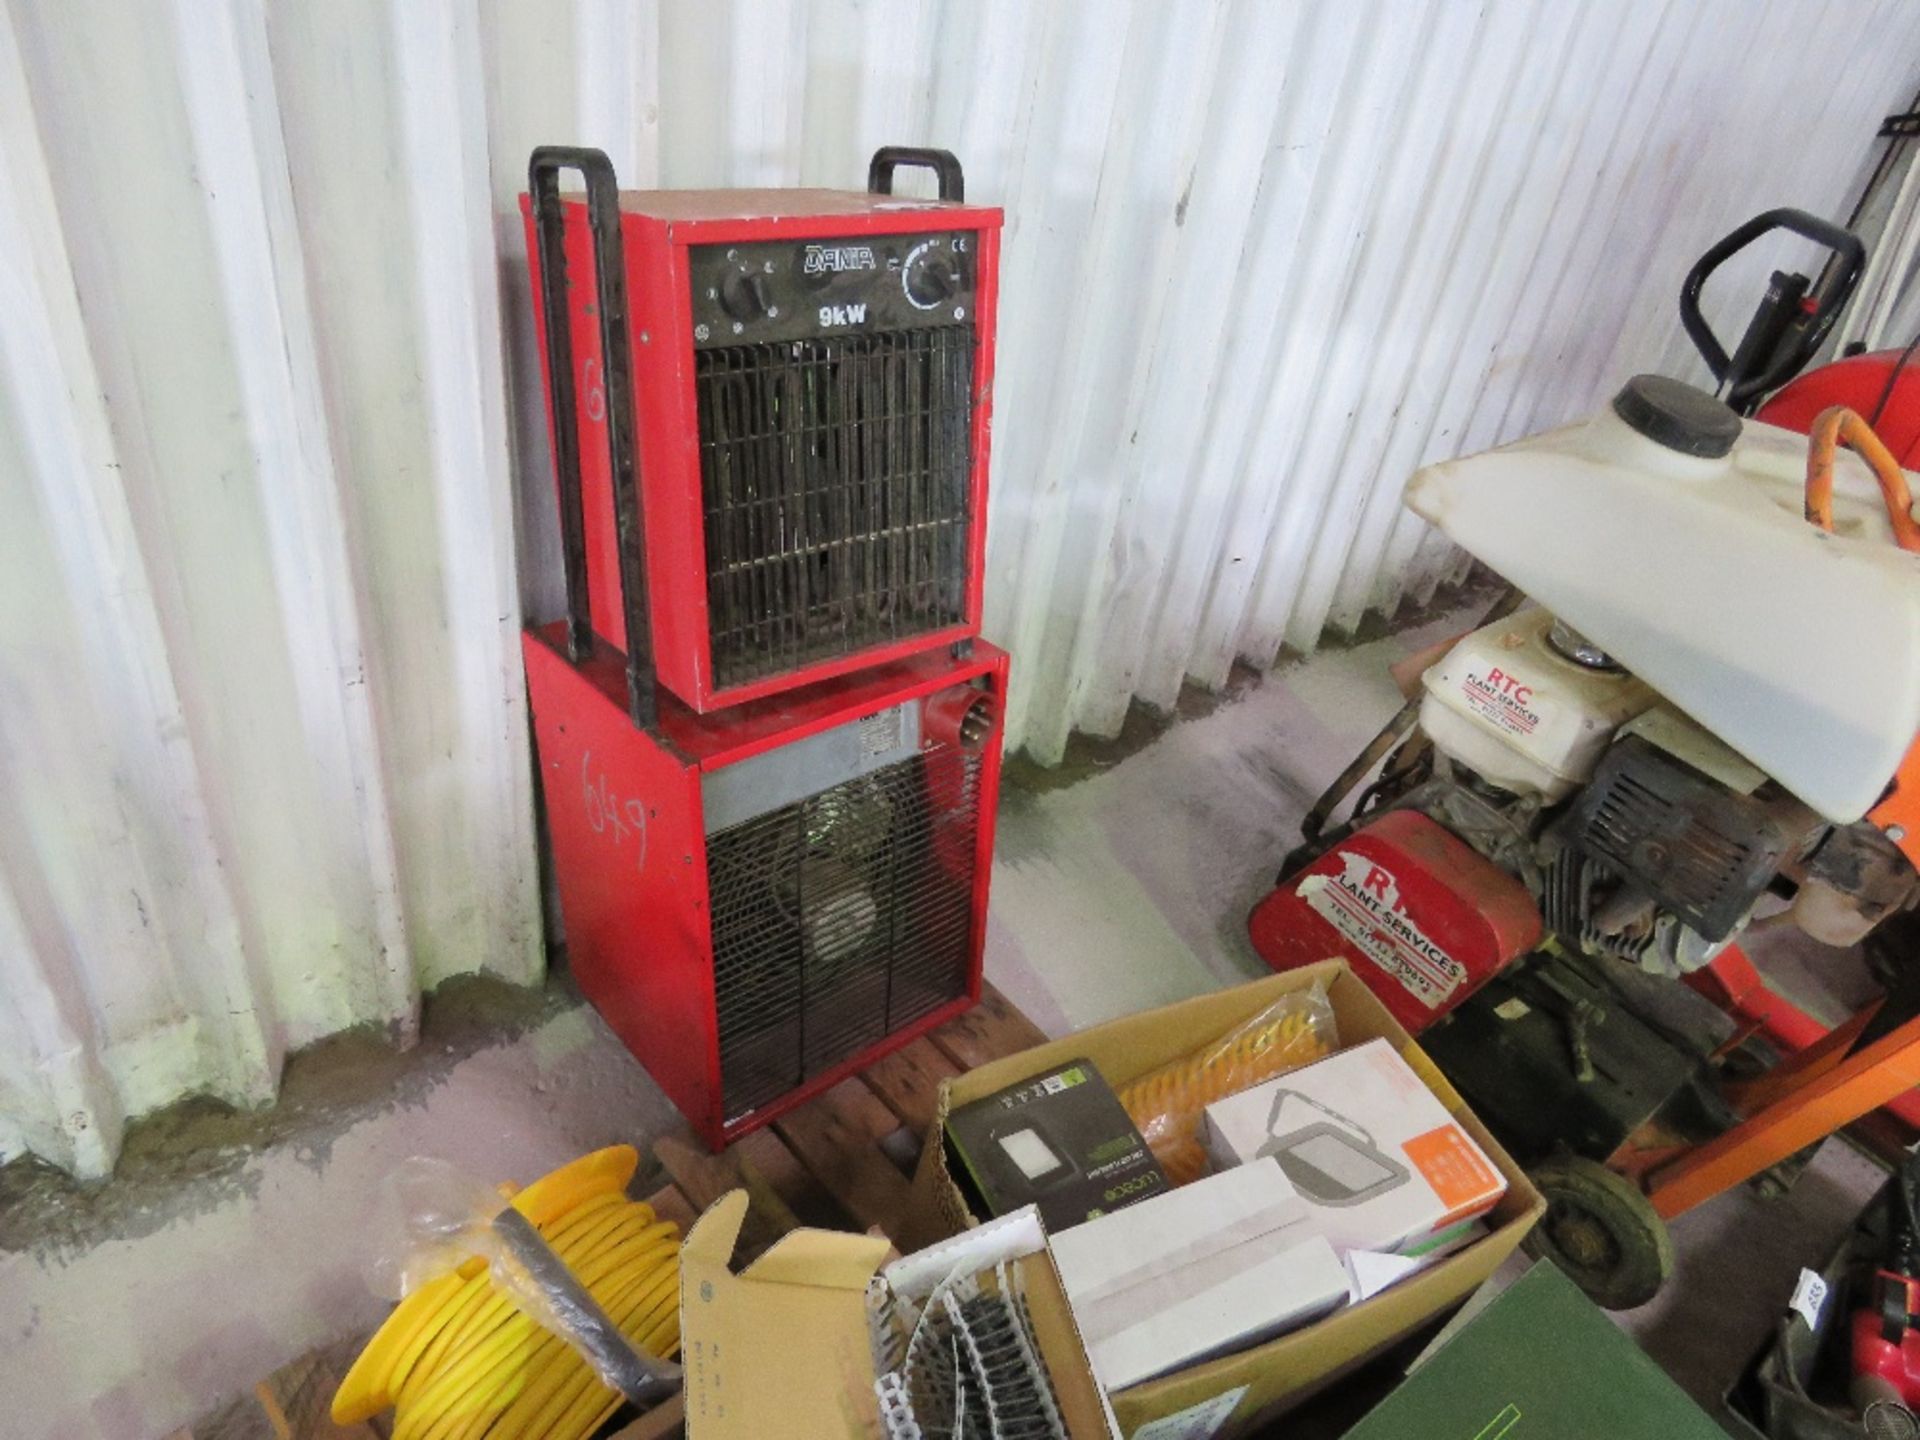 2 X 3PHASE POWERED HEATER UNITS. SOURCED FROM DEPOT CLOSURE. - Image 3 of 4